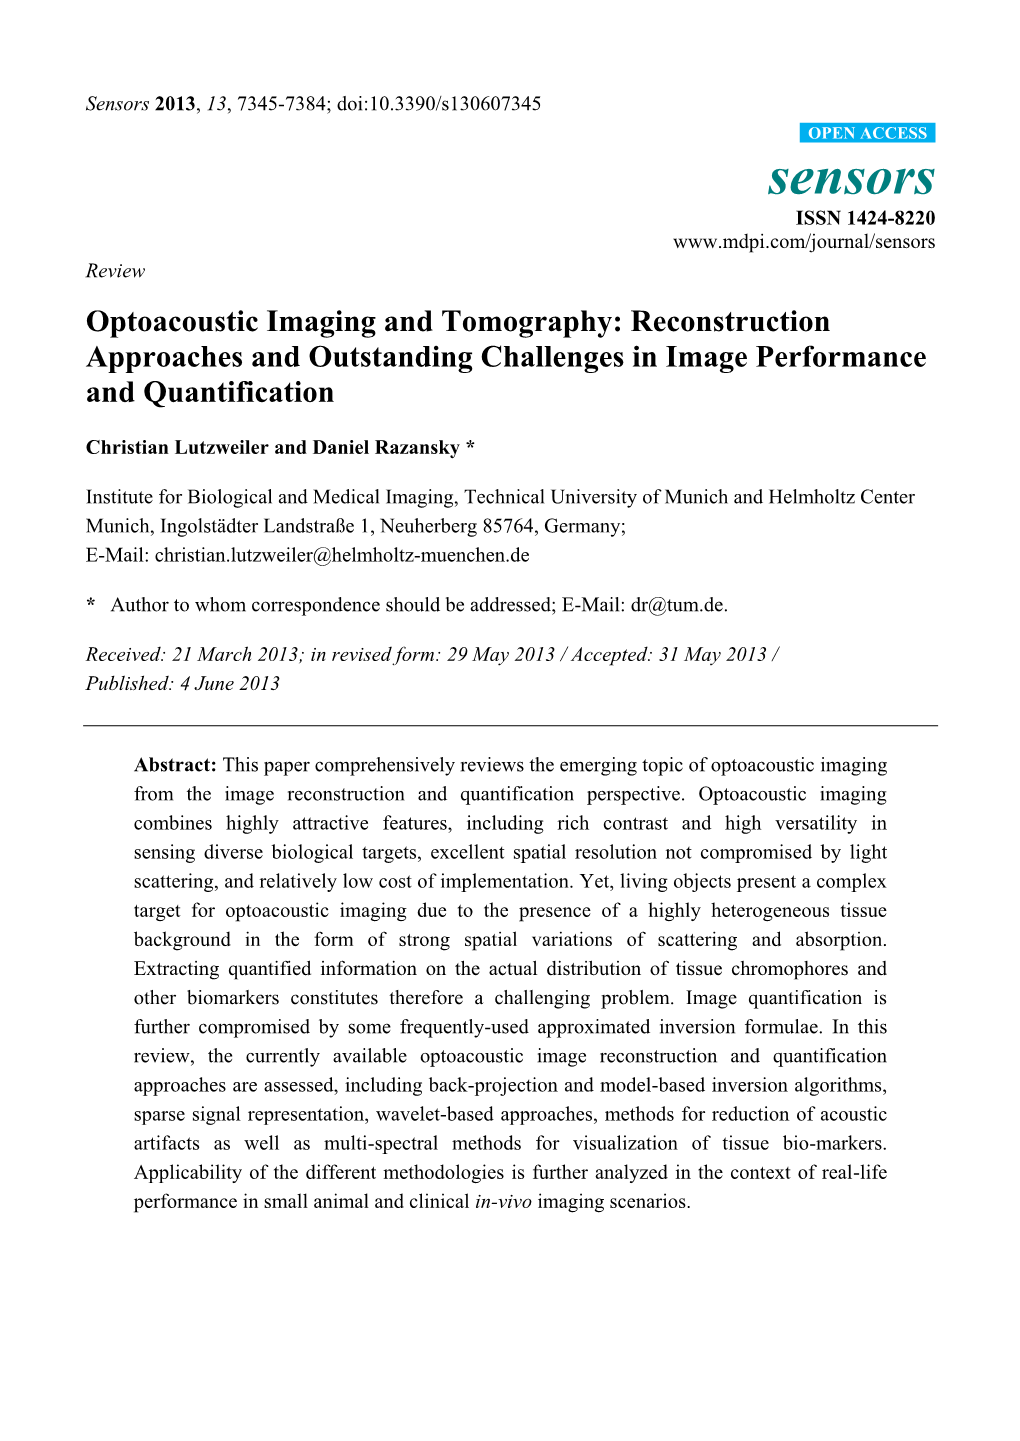 Optoacoustic Imaging and Tomography: Reconstruction Approaches and Outstanding Challenges in Image Performance and Quantification